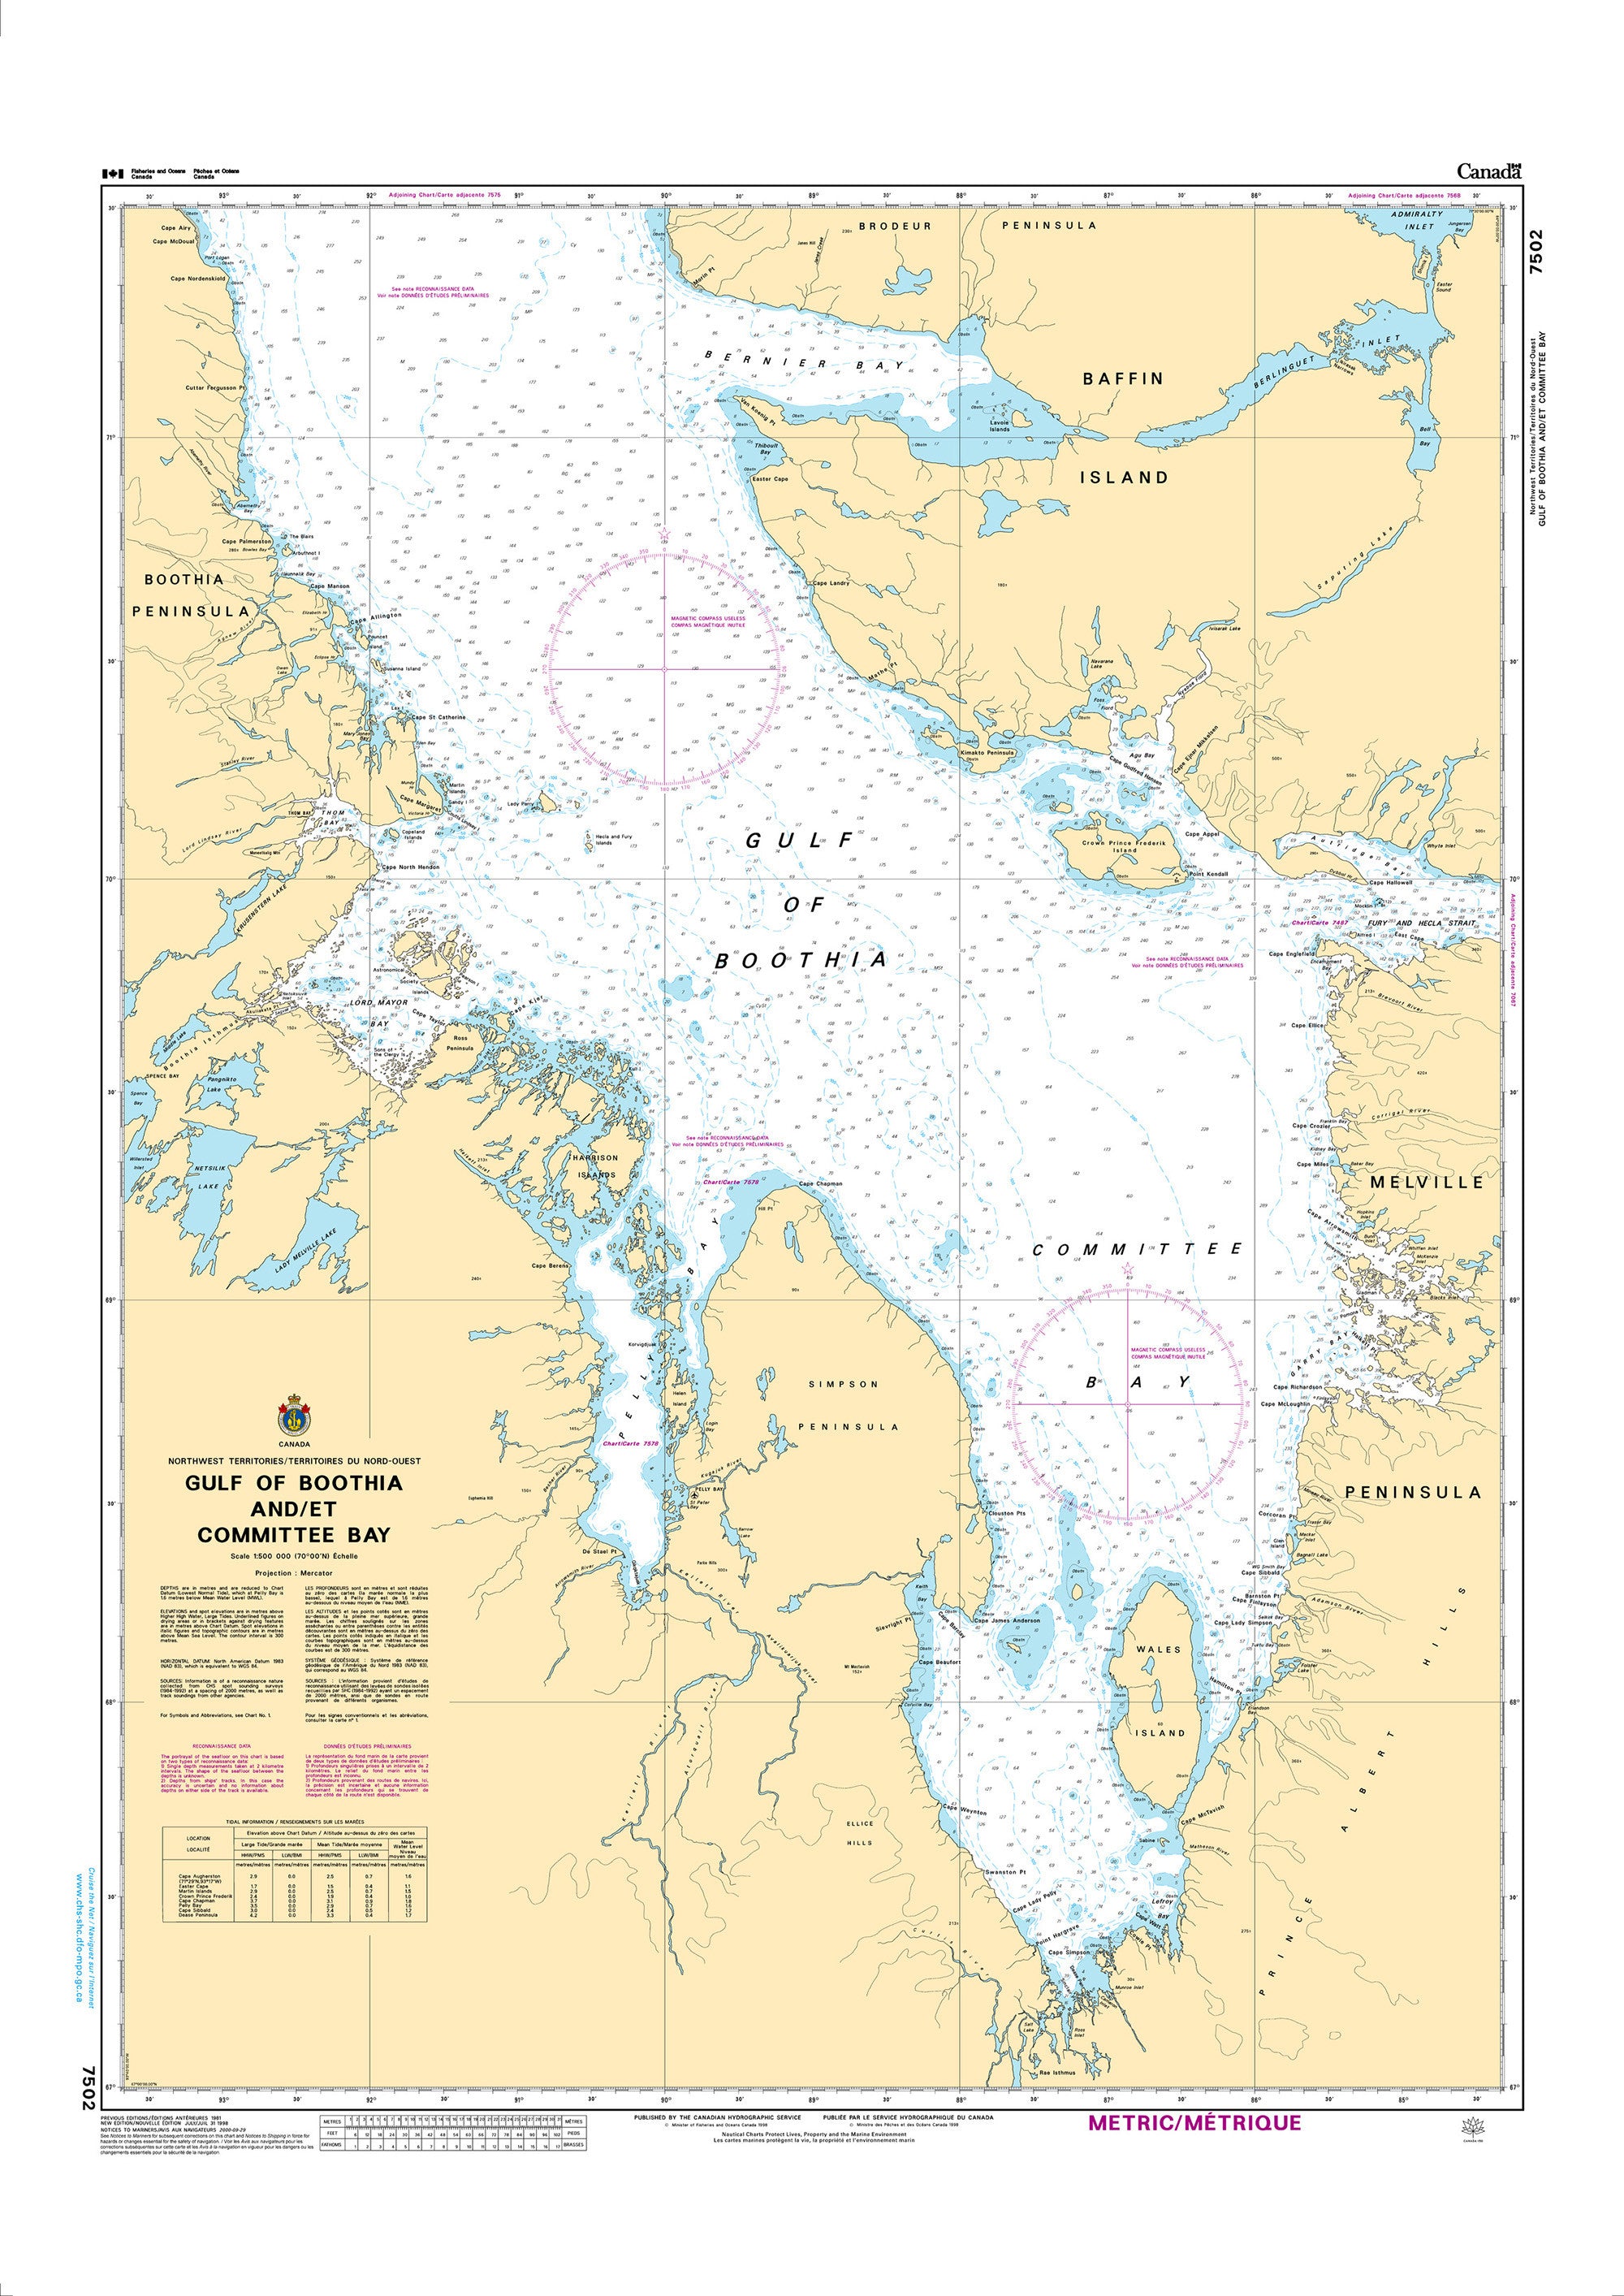 Canadian Hydrographic Service Nautical Chart CHS7502: Gulf of Boothia and/et Committee Bay